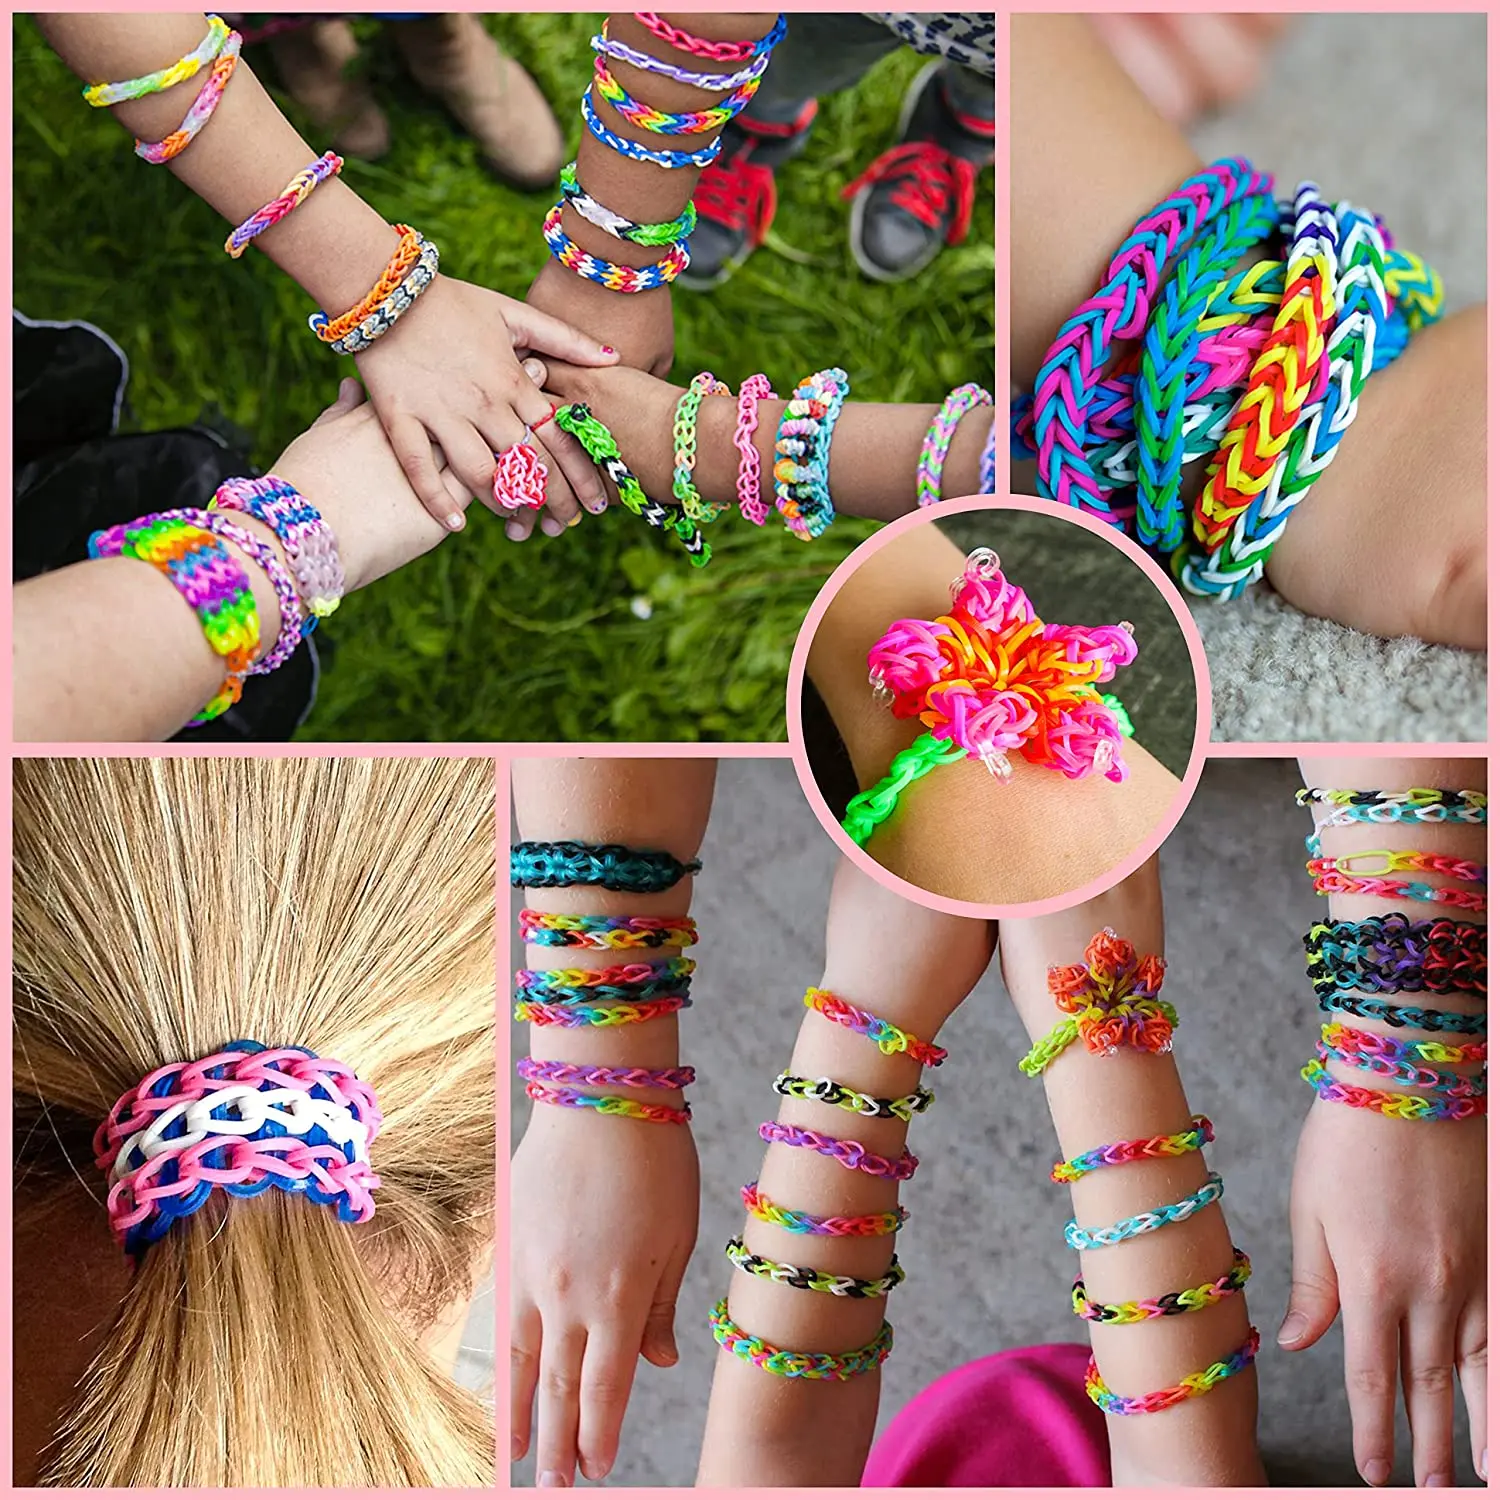 High Quality Wholesale Bands Kids Educational Toy Diy Crafting Bracelets Gifts Refills Kit Set Rainbow Rubber Bands